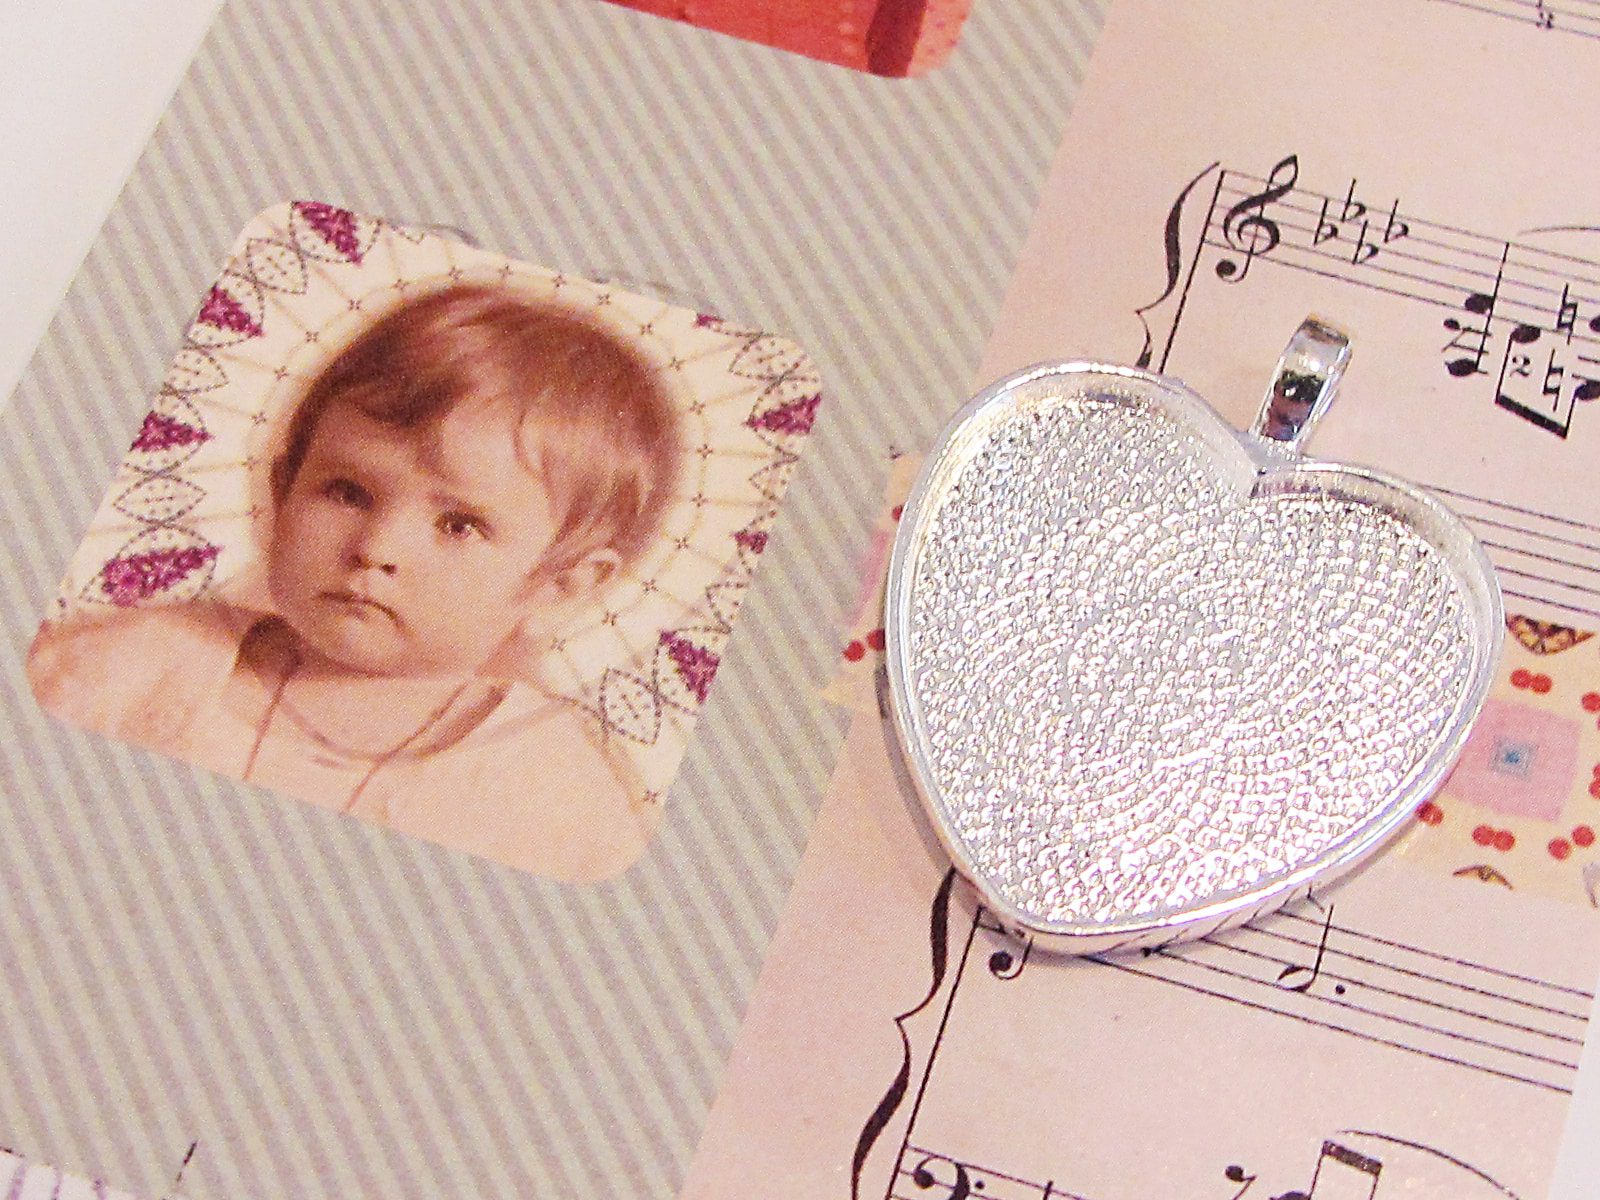 pendant with baby image